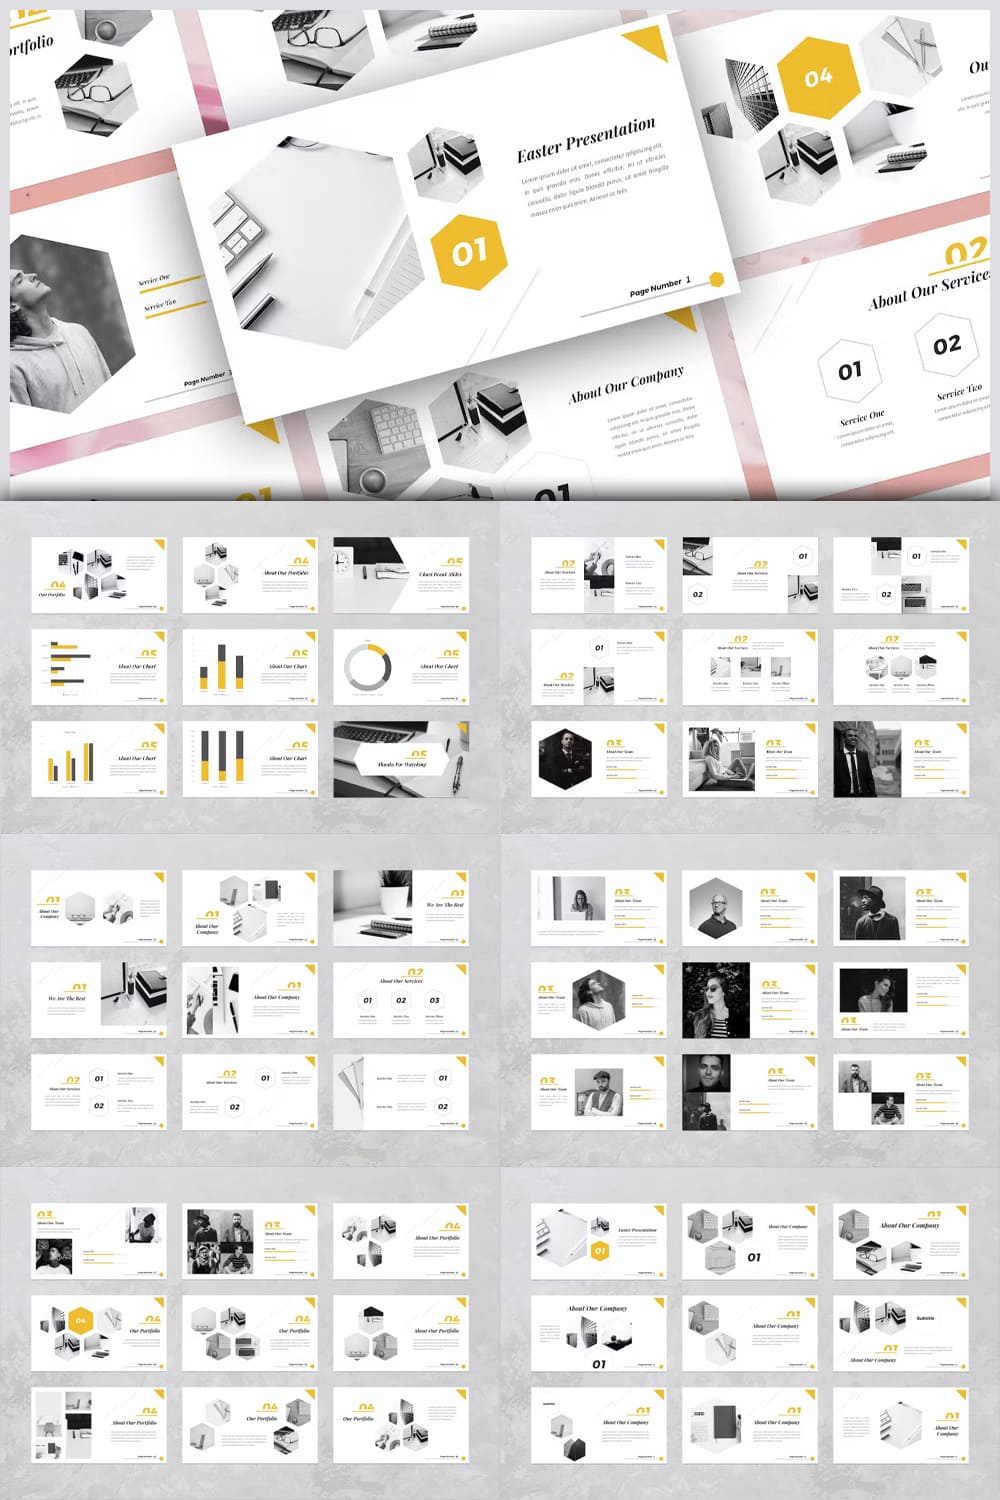 Easter creative powerpoint template - pinterest image preview.